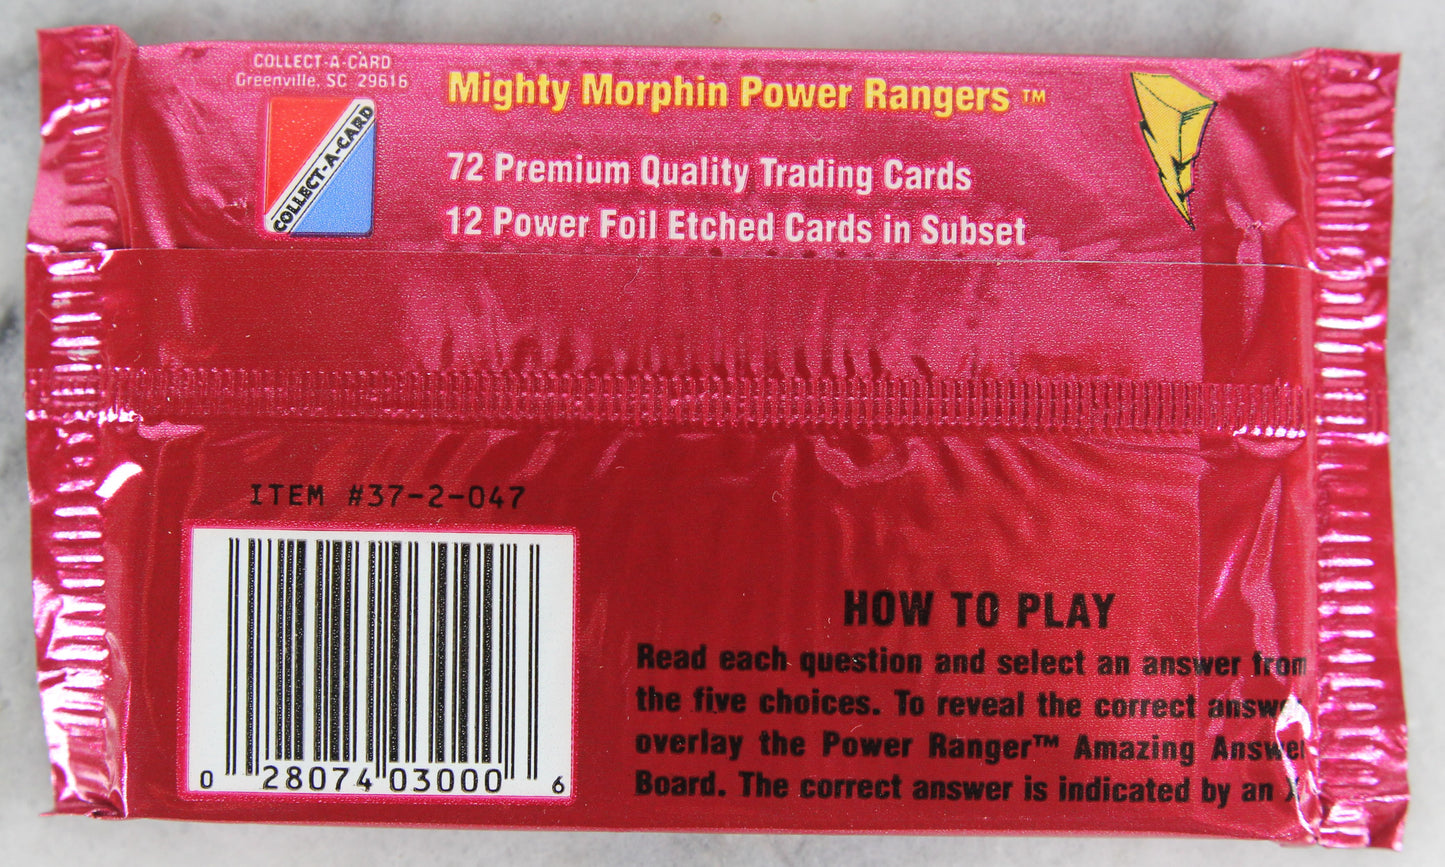 Mighty Morphin Power Rangers Collectible Trading Cards, Series 2, One Pack, 1994